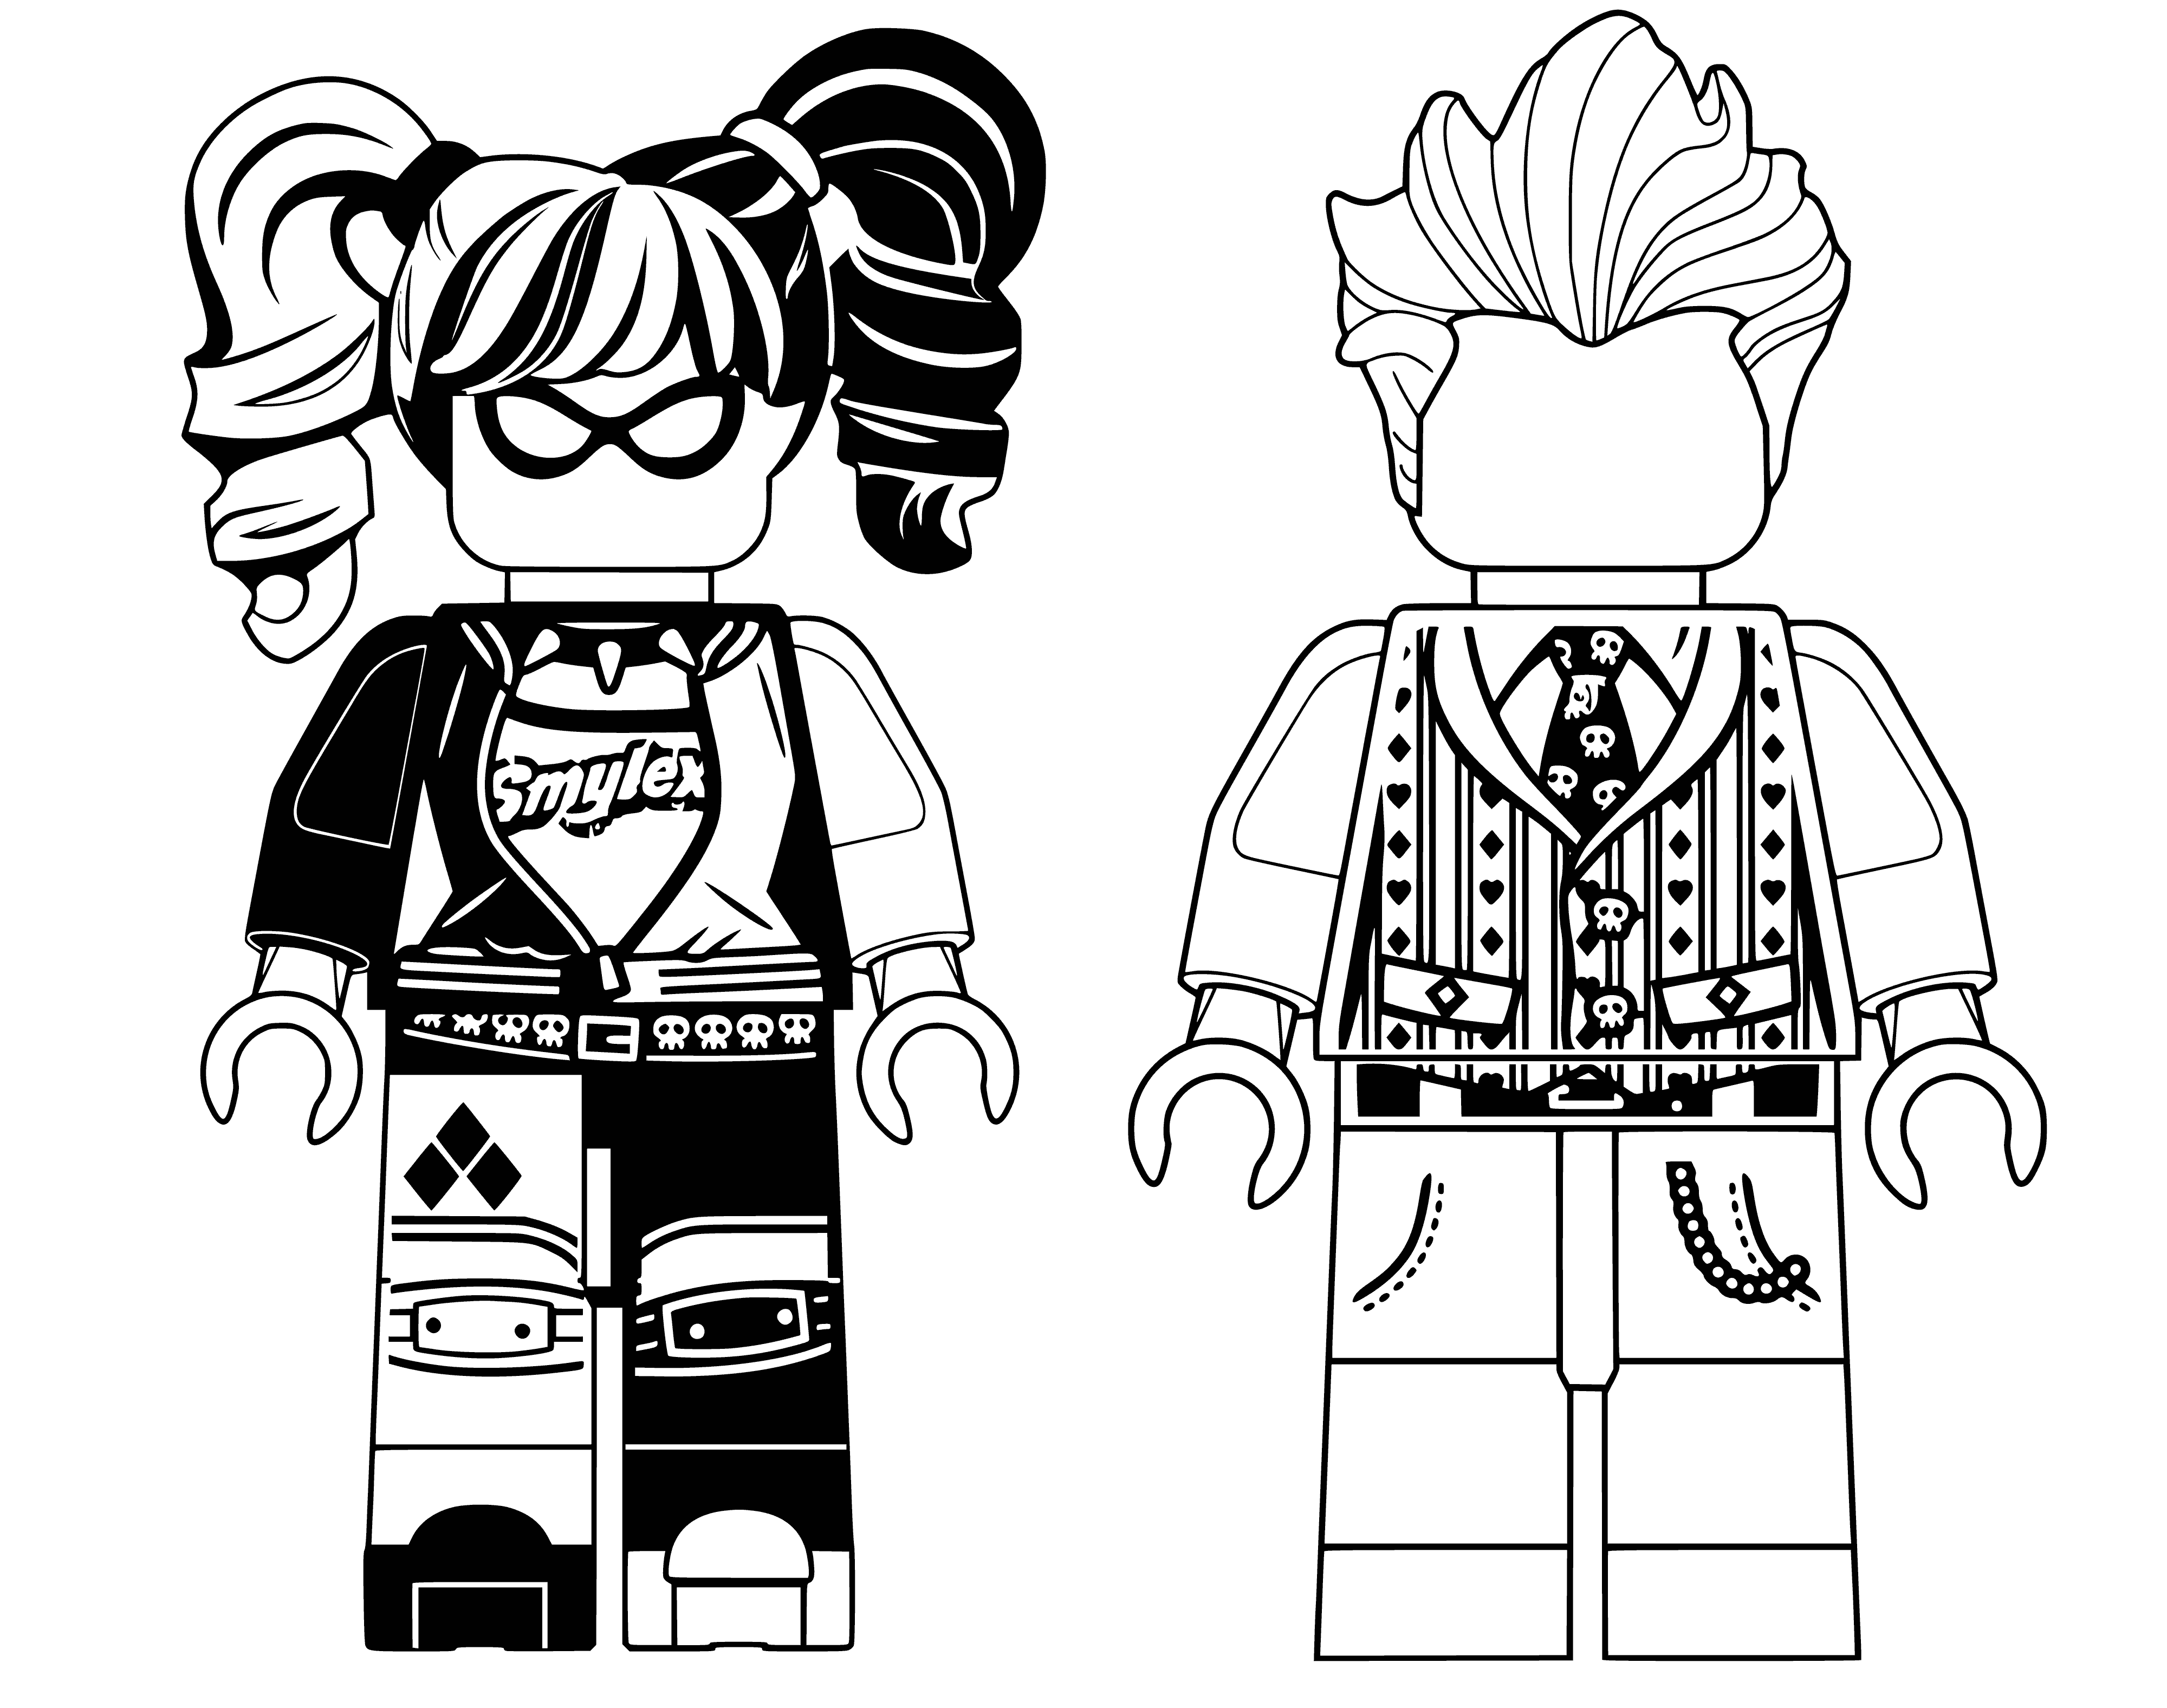 coloring page: Lego Harley Quinn & Joker are featured together in a coloring page. She wears her iconic red & black, with white face and black eyes. Joker wears purple suit, green shirt and yellow tie, with white skin, green hair & painted red smile. #coloringpages #Supervillains